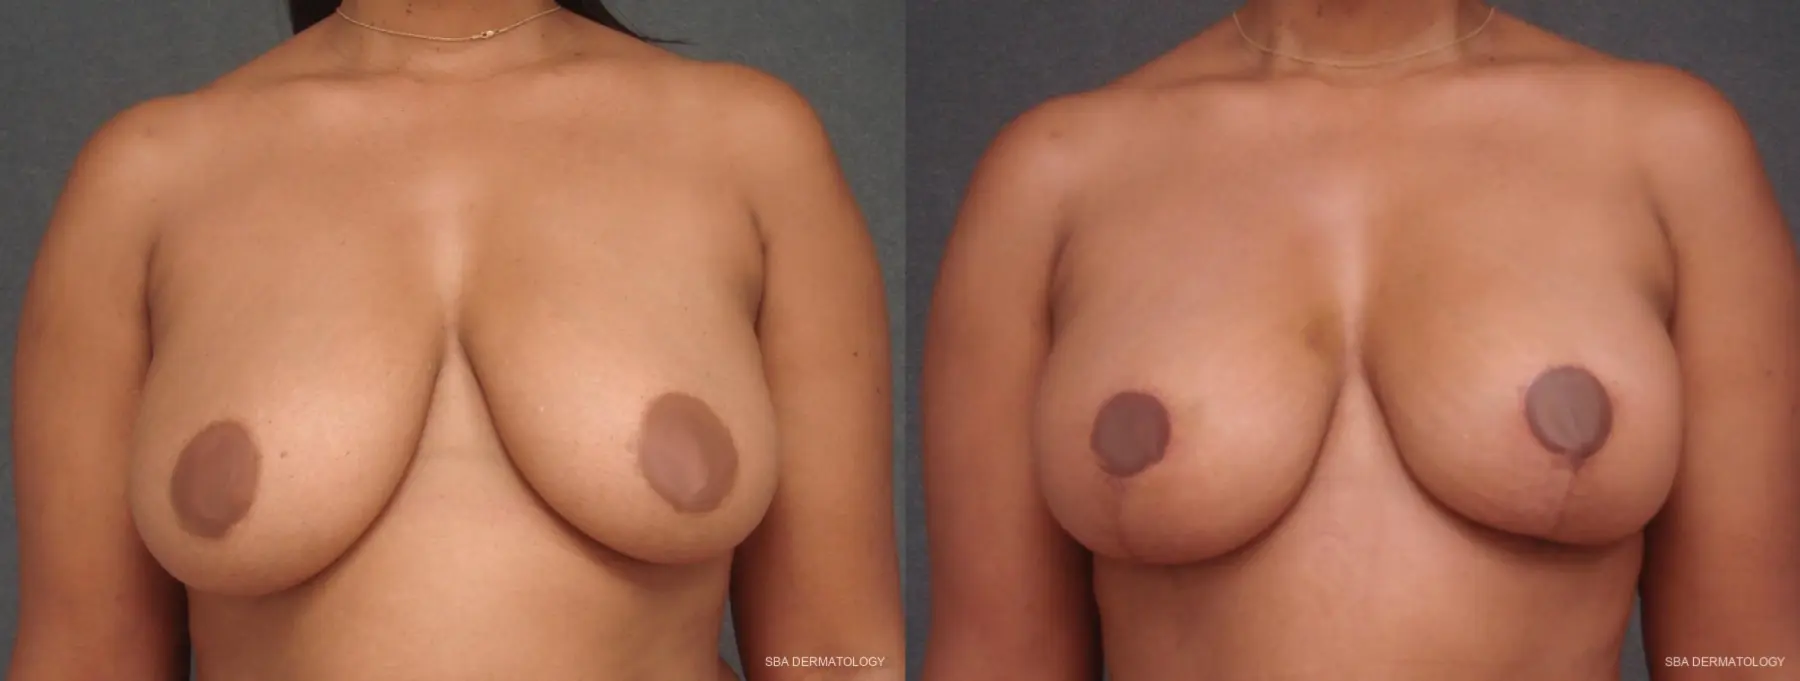 Breast Lift: Patient 1 - Before and After 1